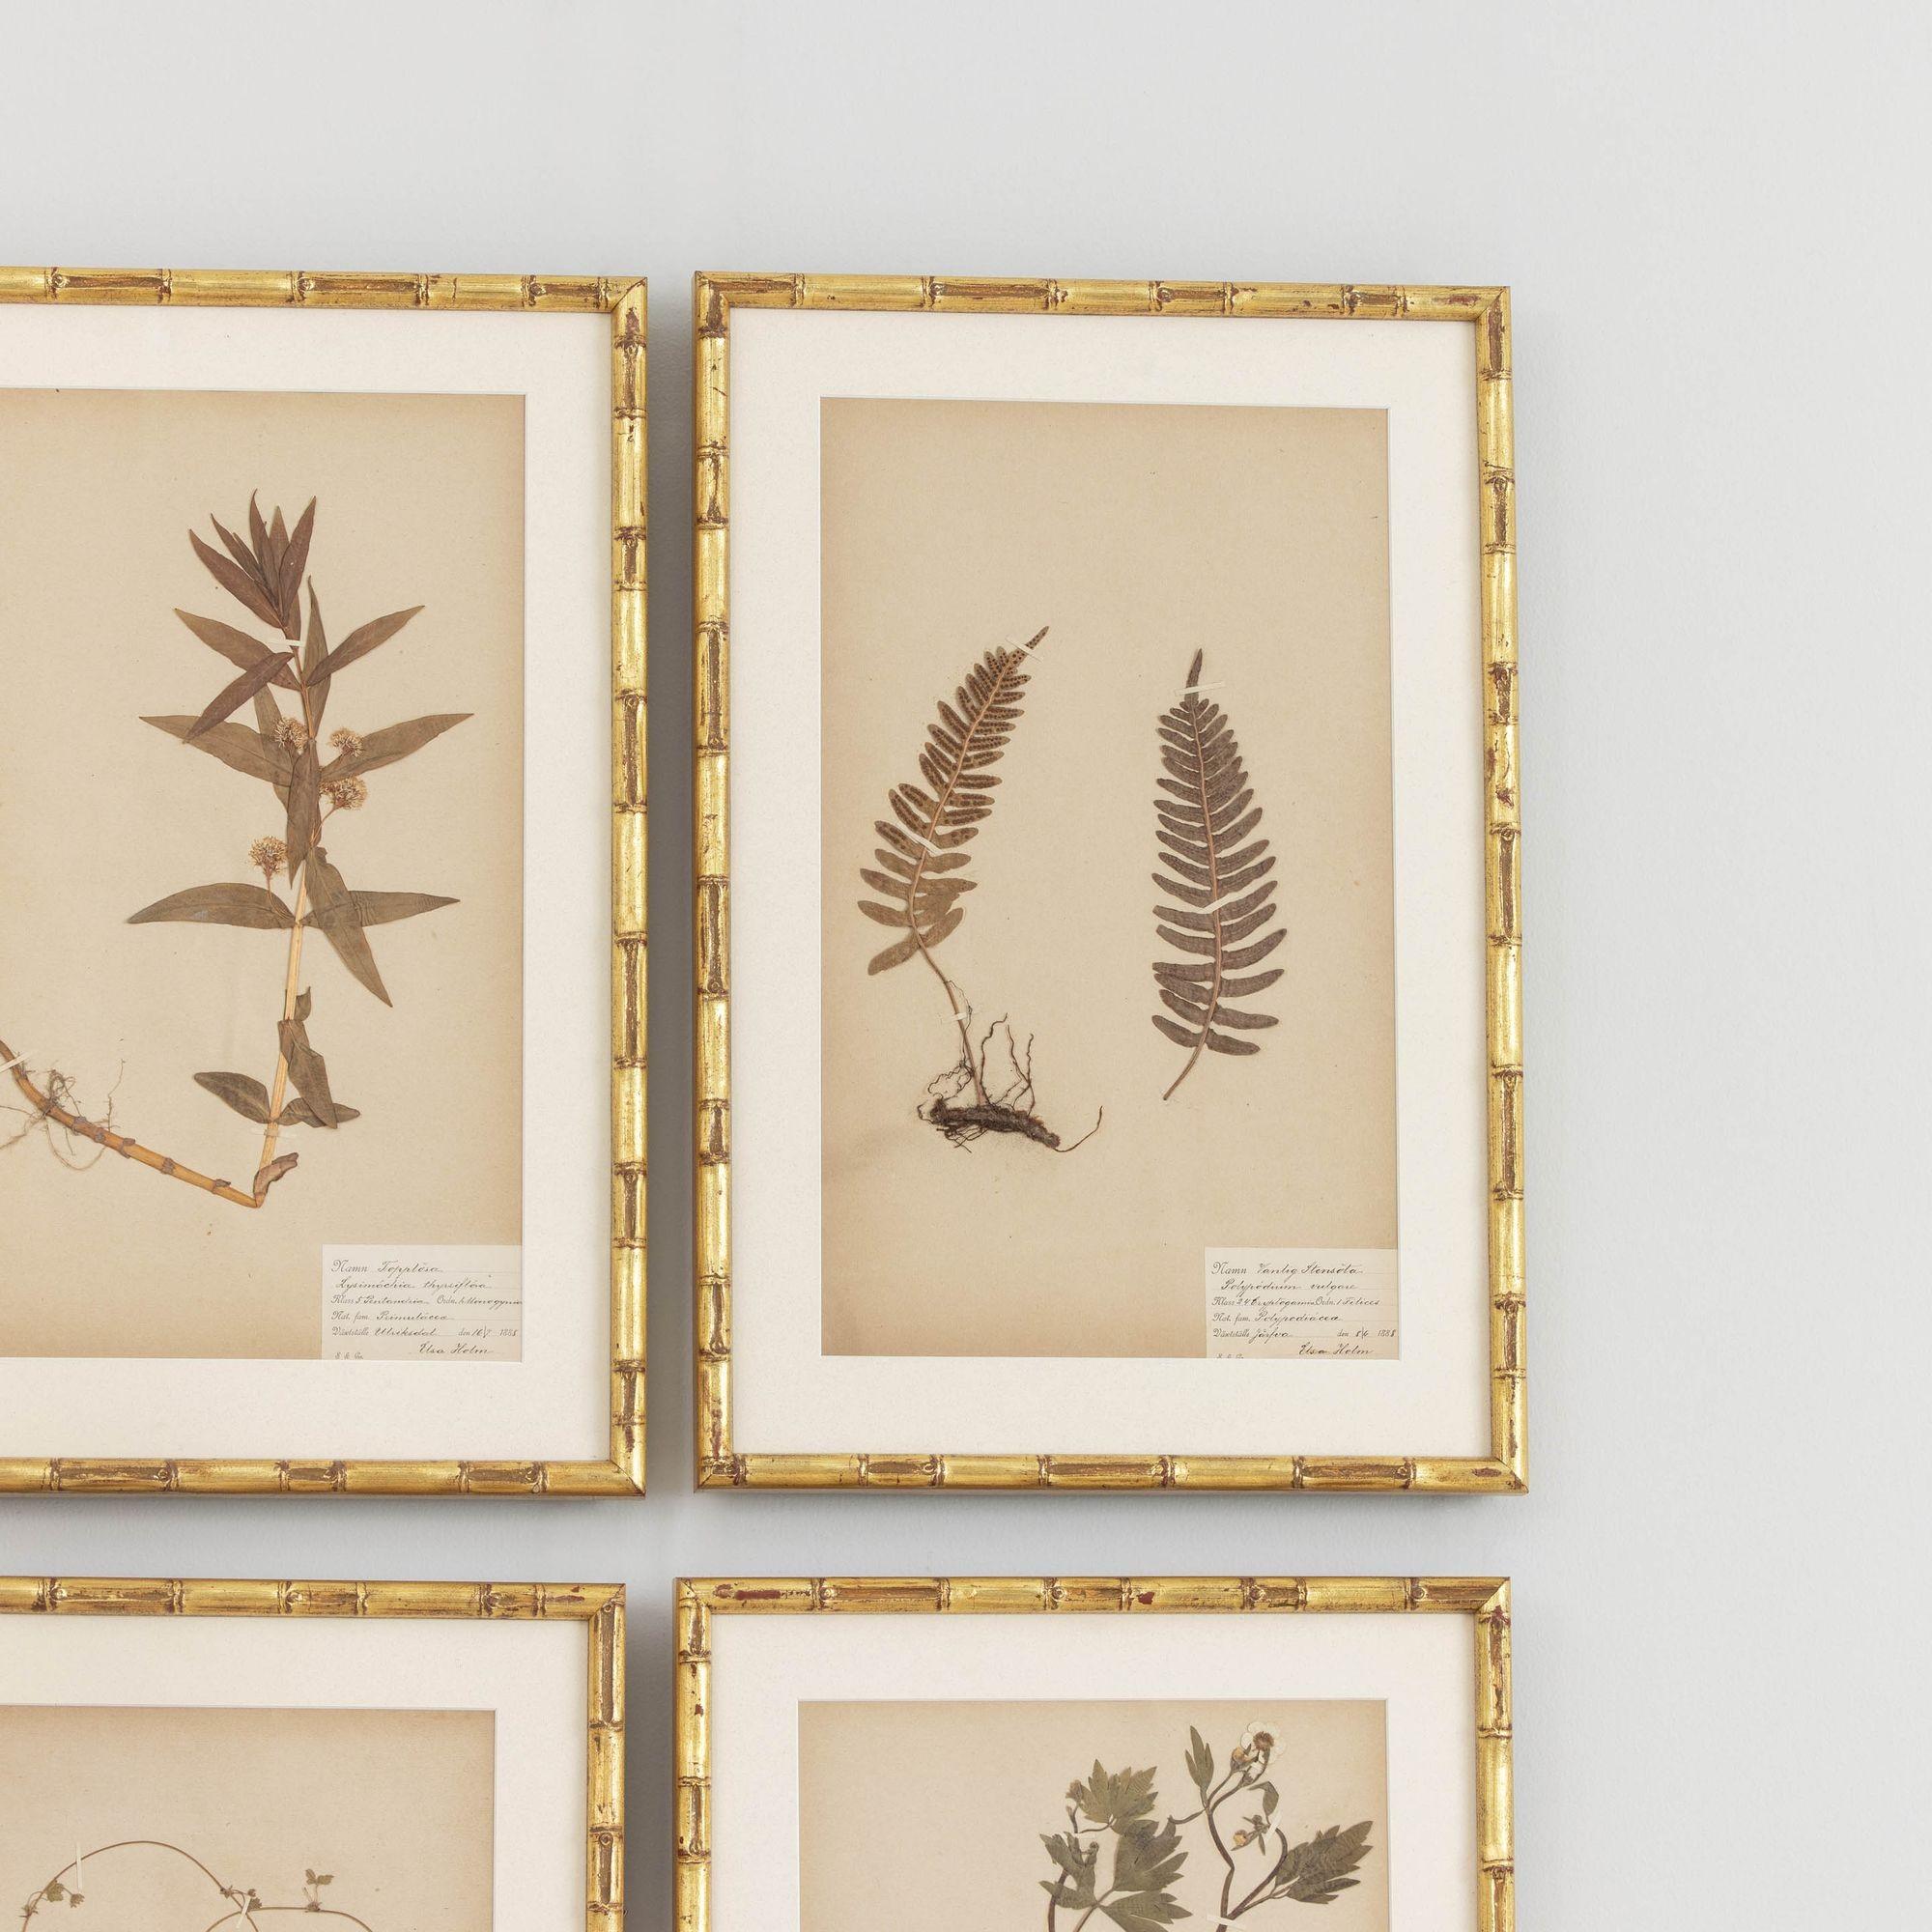 Wood 19th c. Collection of 9 Framed Large Swedish Herbarium Studies